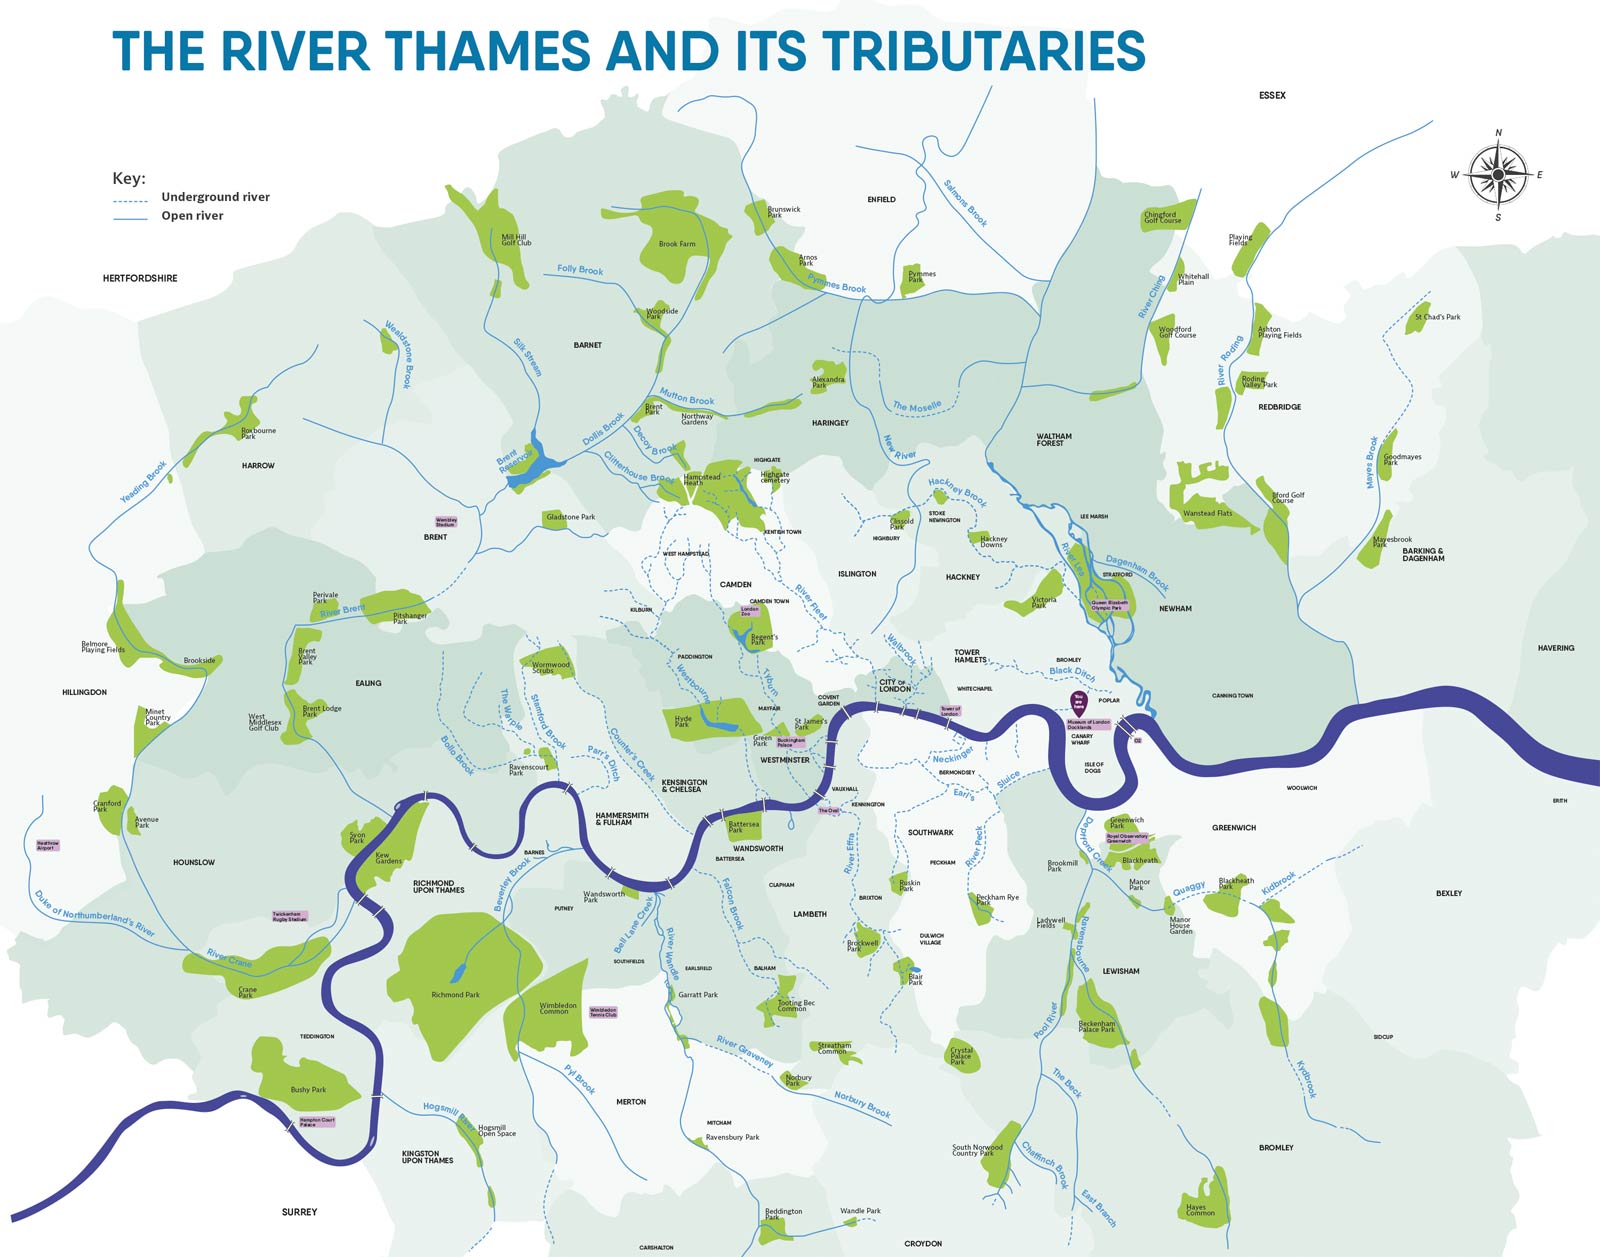 Map of the River Thames and its tributaries